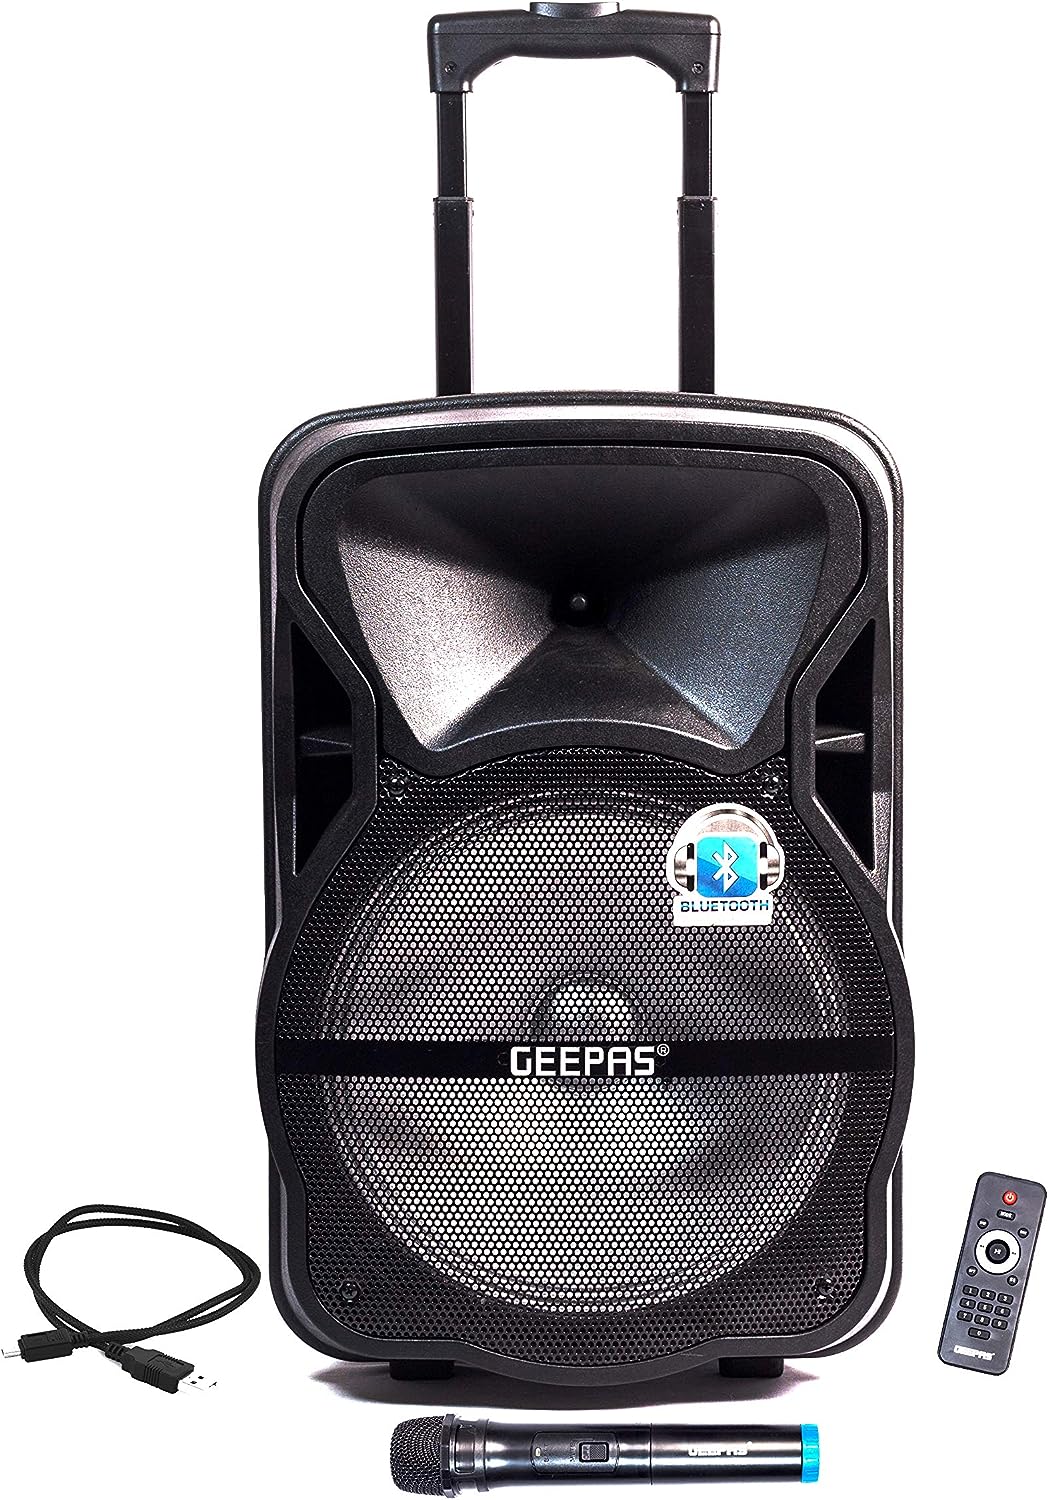 Geepas Professional Portable Rechargeable Speaker System GMS8568